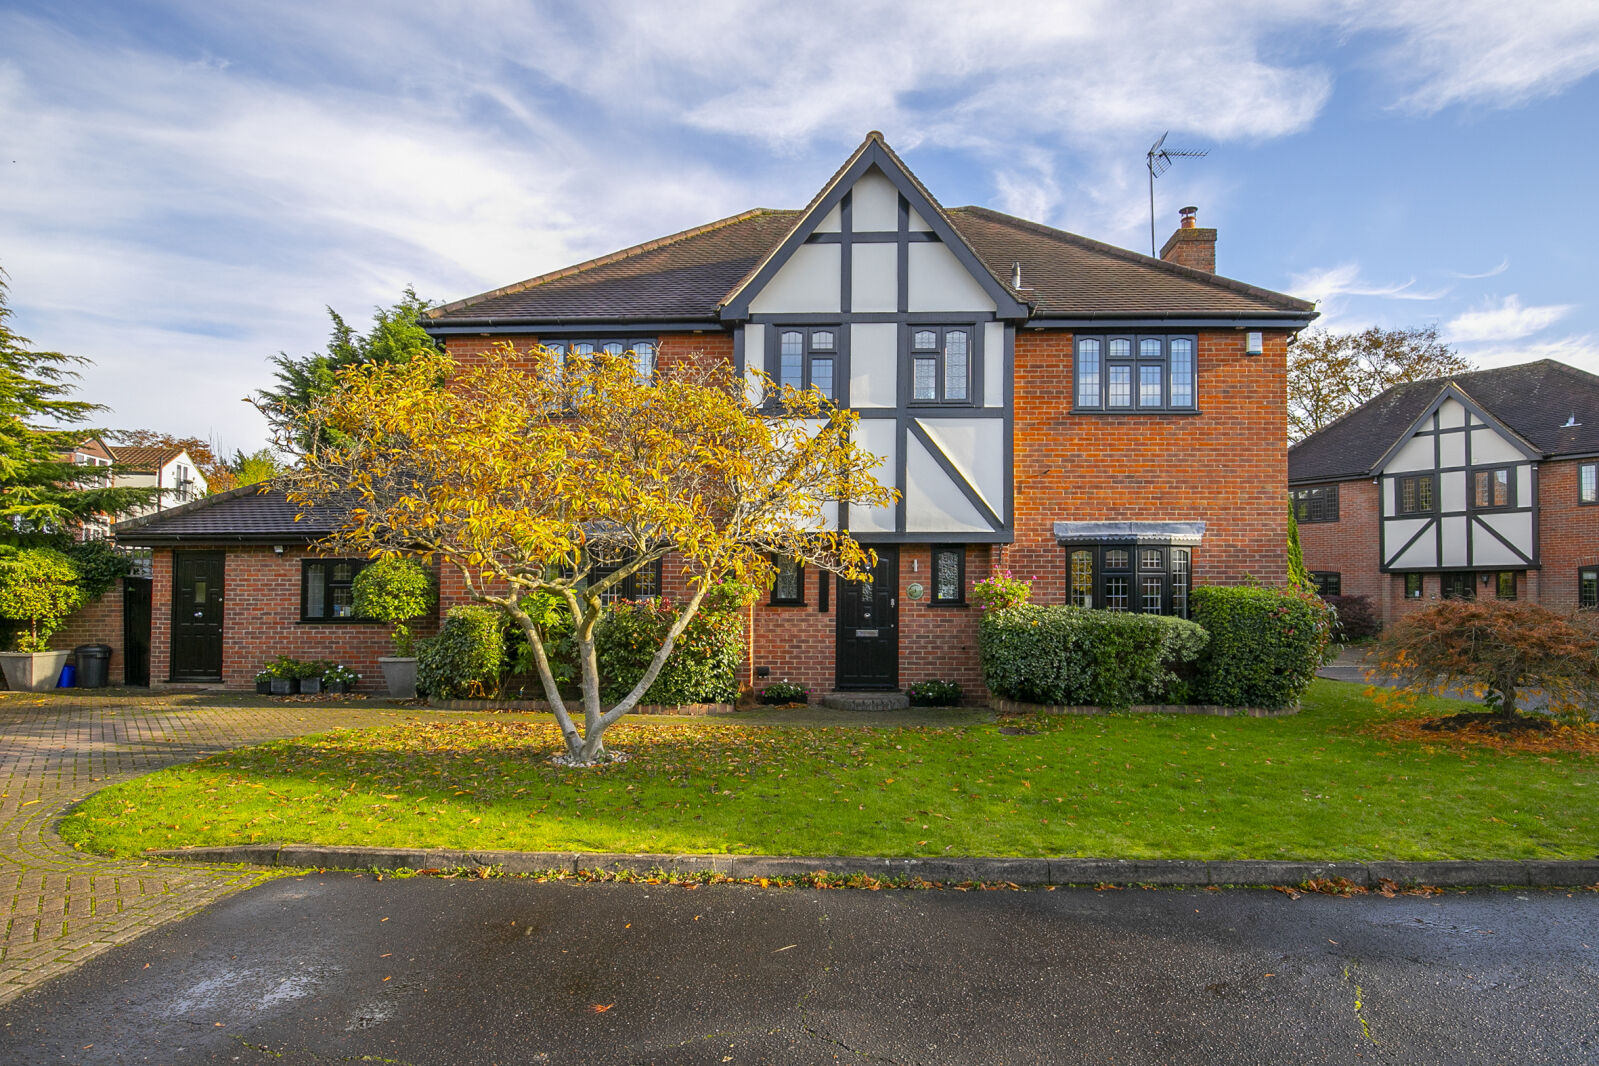 5 bedroom detached house for sale Northfield, Loughton, IG10, main image